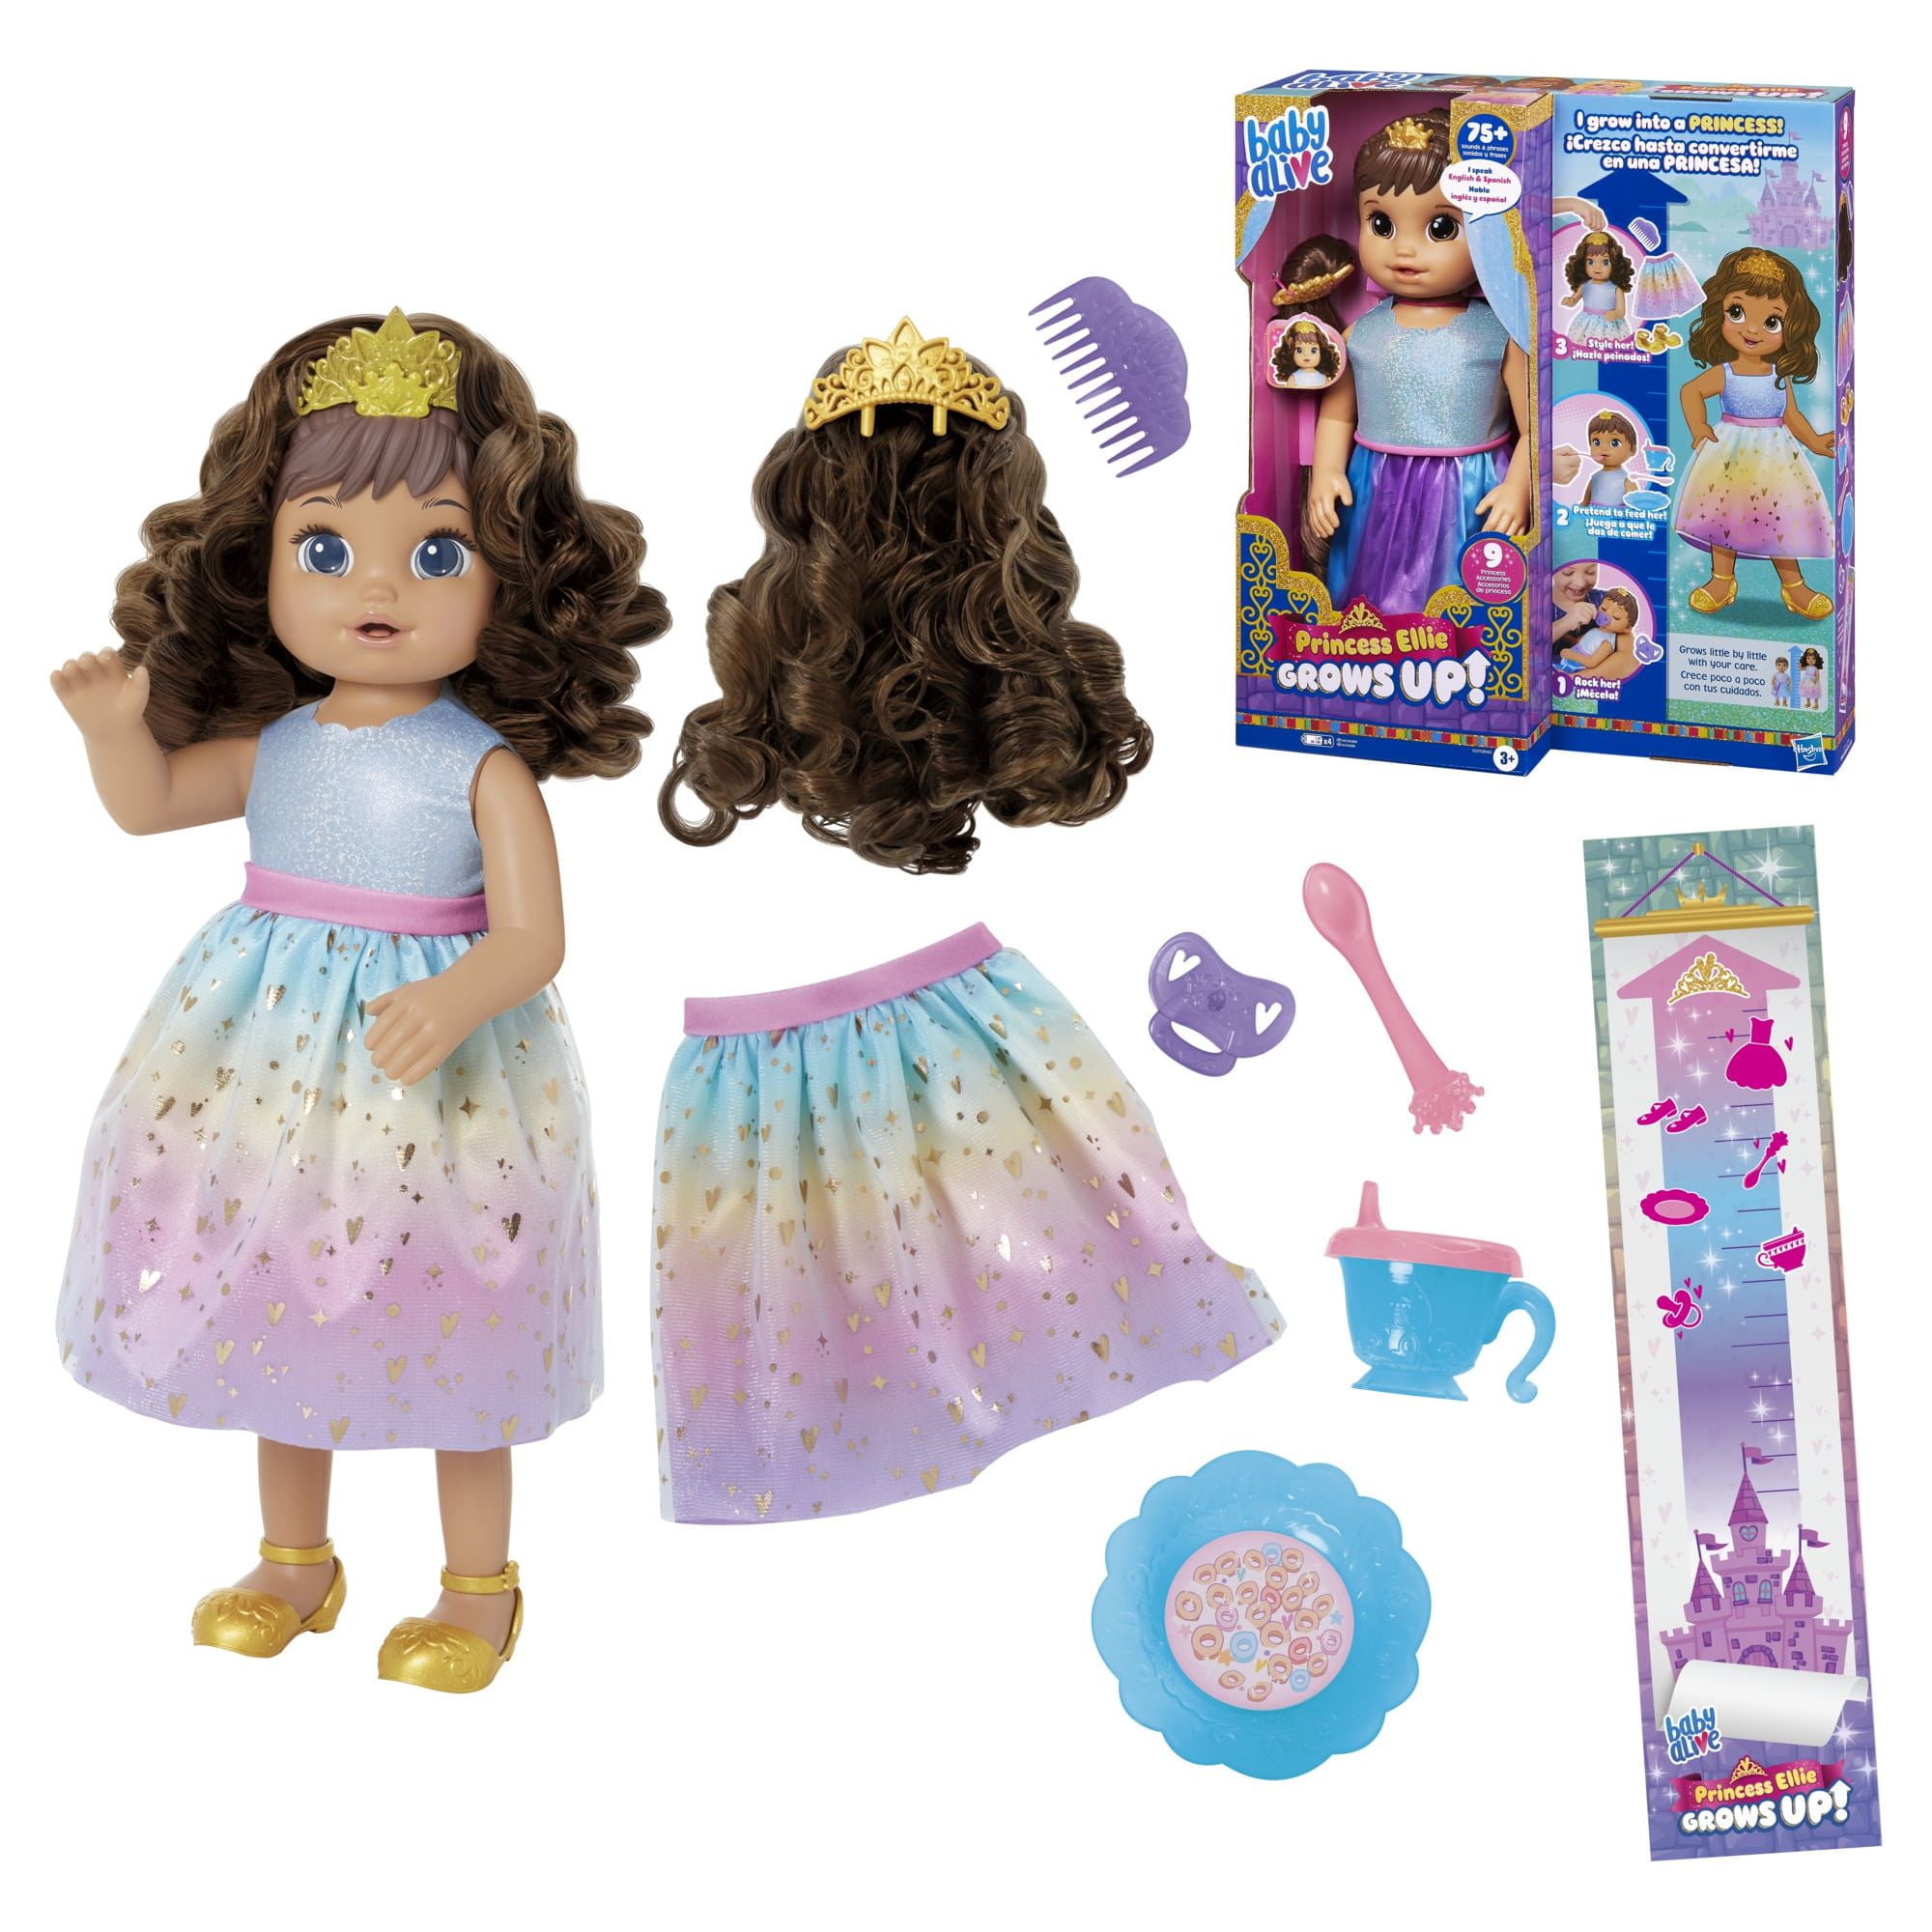 Baby Alive: Princess Ellie Grows Up! 15-Inch Doll Blonde Hair, Blue Eyes  Kids Toy for Boys and Girls